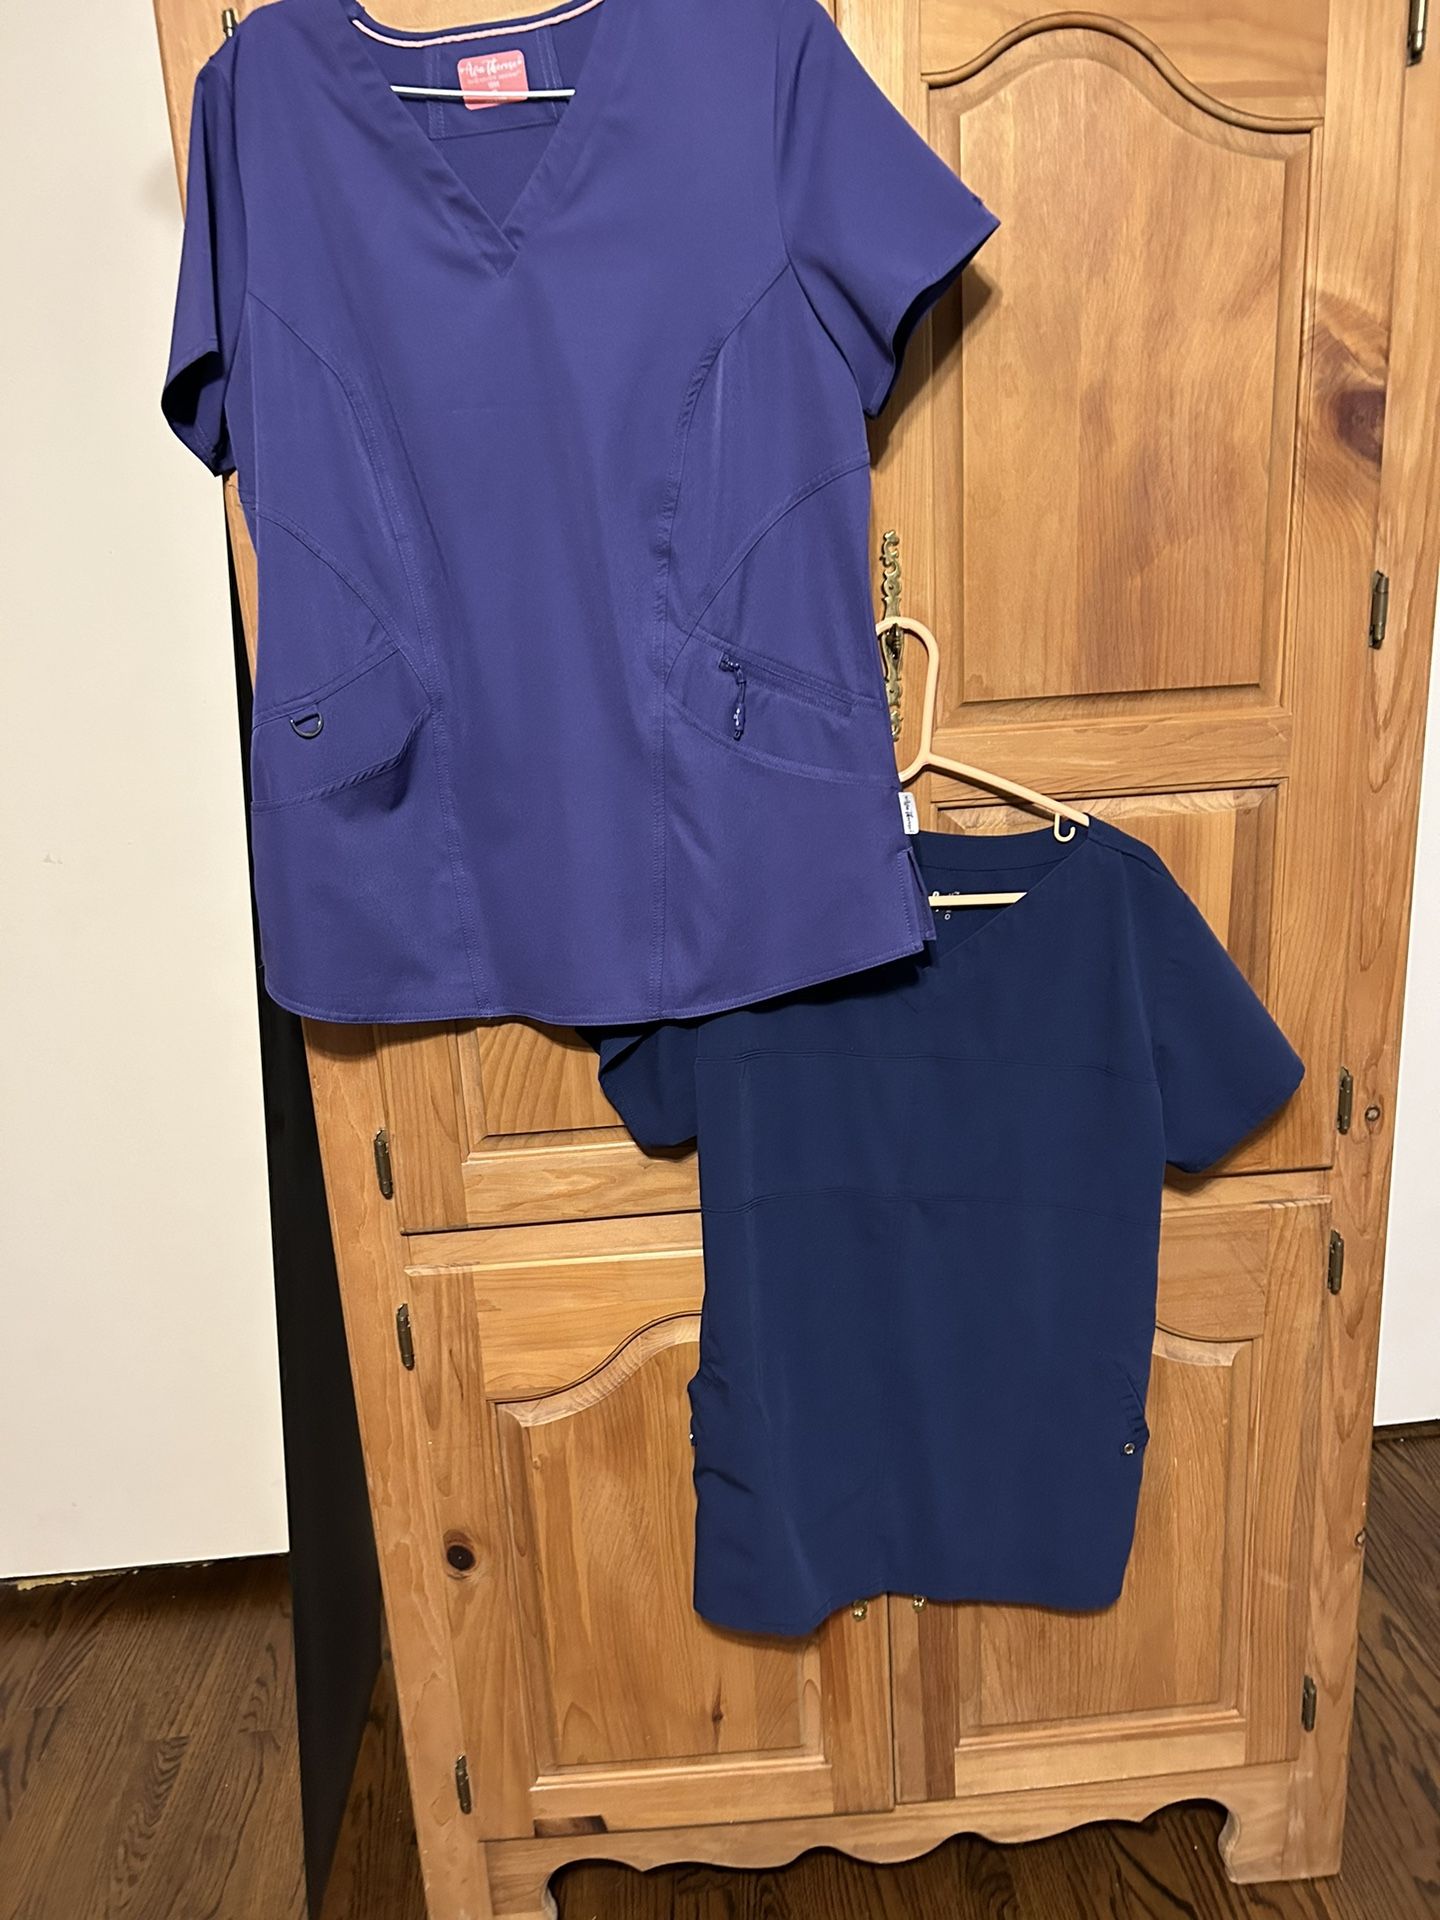 Women’s Scrubs-multiple colors available